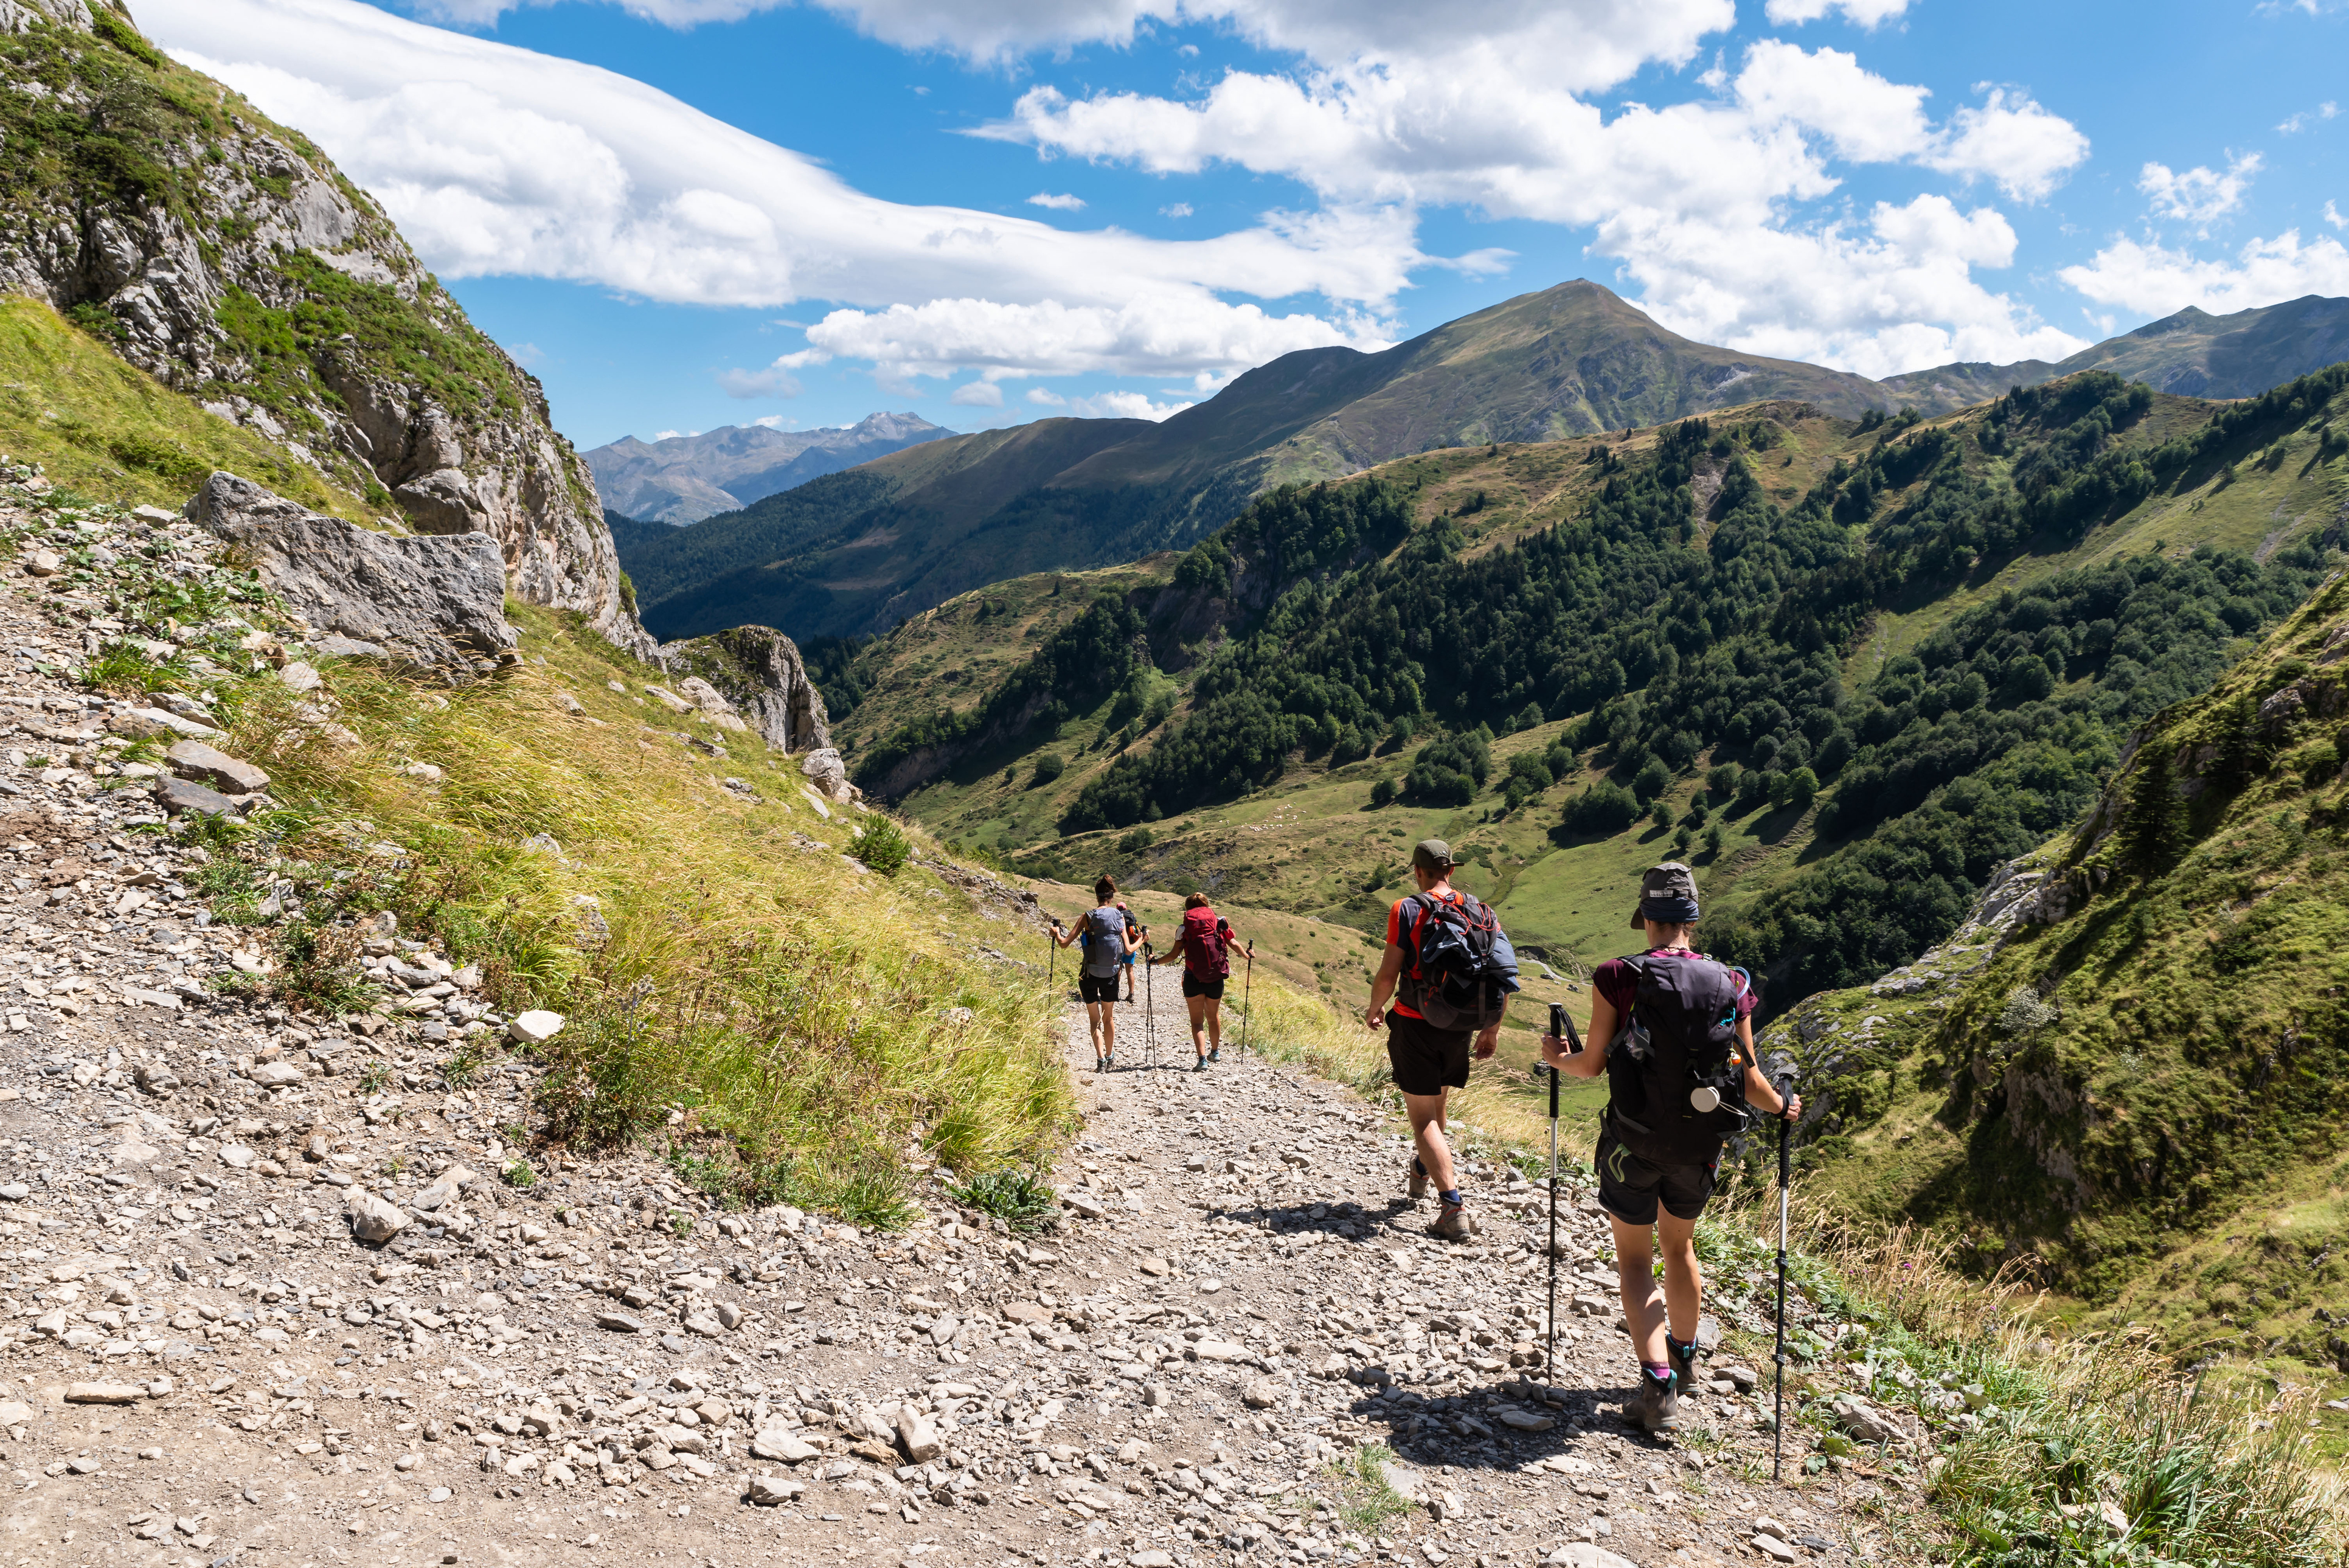 A group hiking together in the Pyrenees